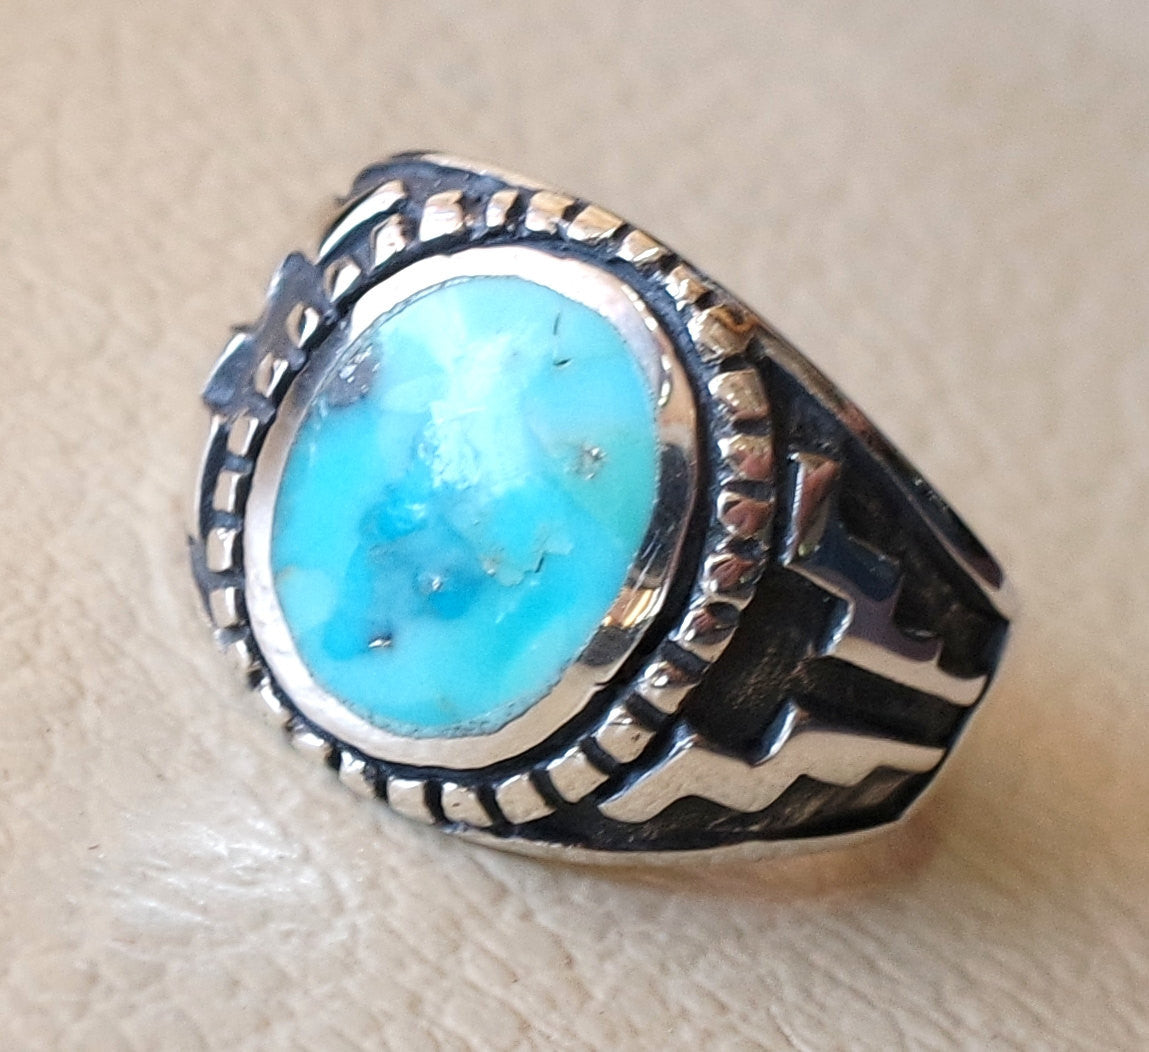 restructured natural turquoise oval blue stone sterling silver 925 man ring  any size  middle eastern ottoman style jewelry